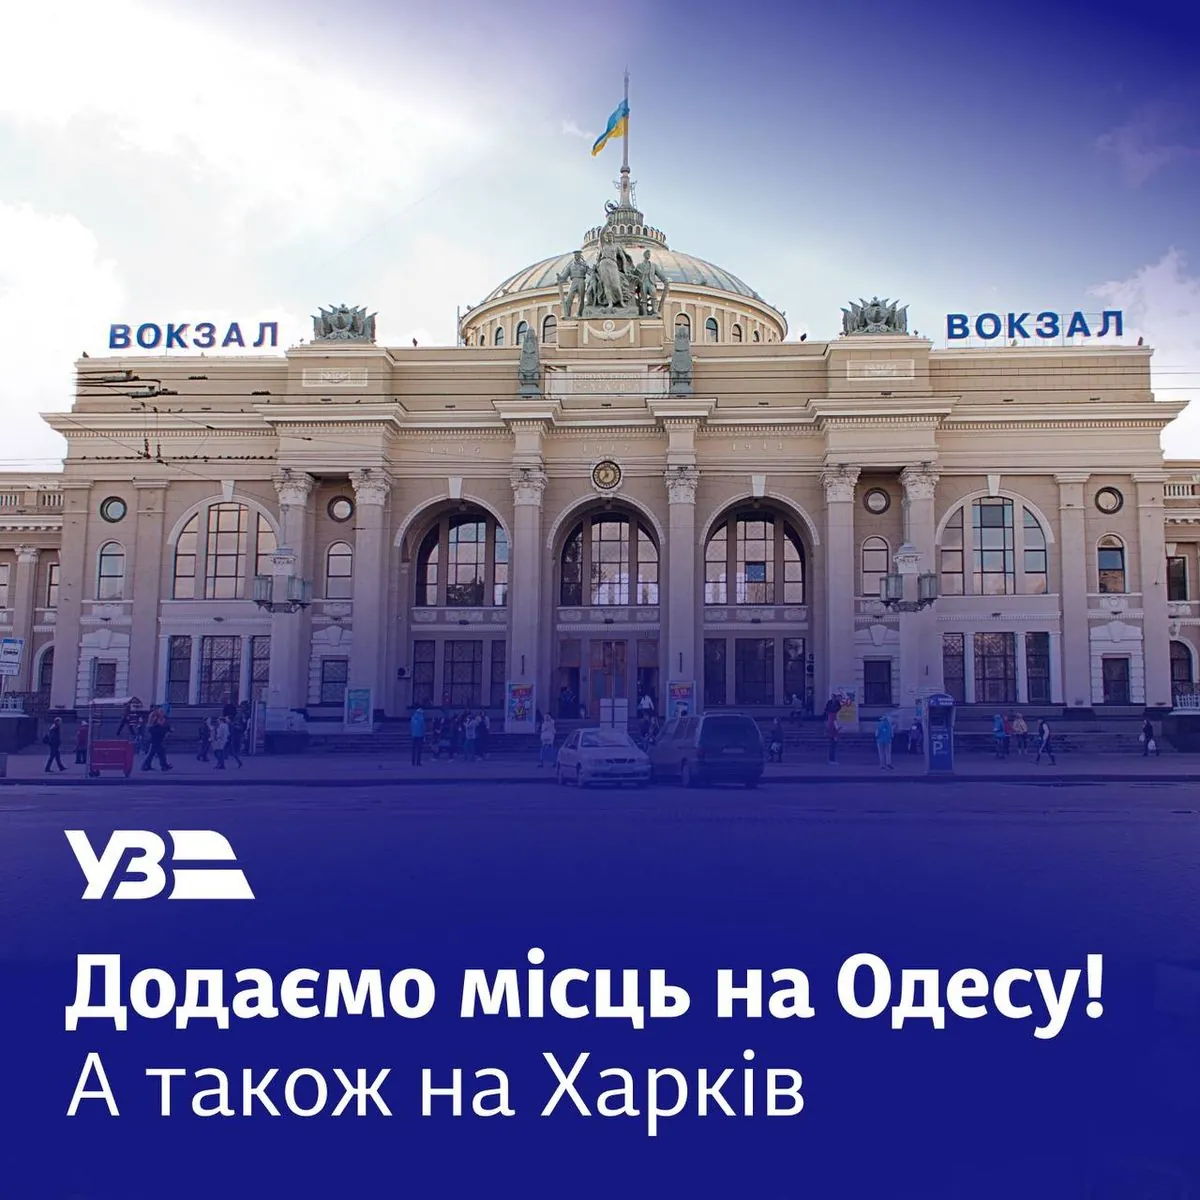 a-trip-to-the-sea-uz-appointed-an-additional-train-kyiv-odesa